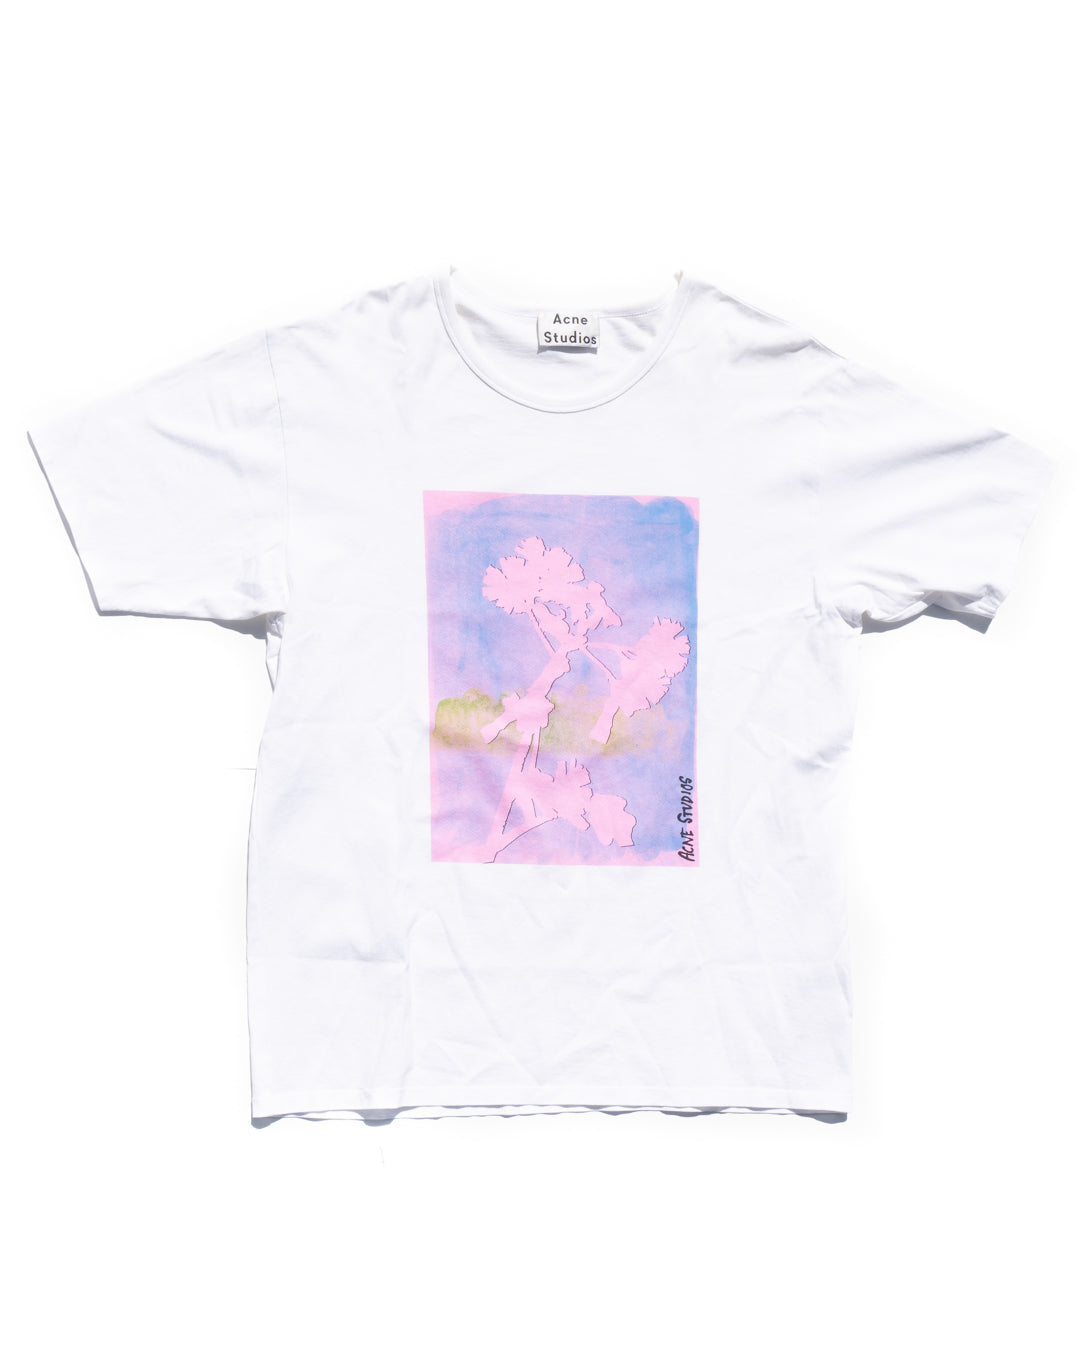 SS18 Graphic Tee